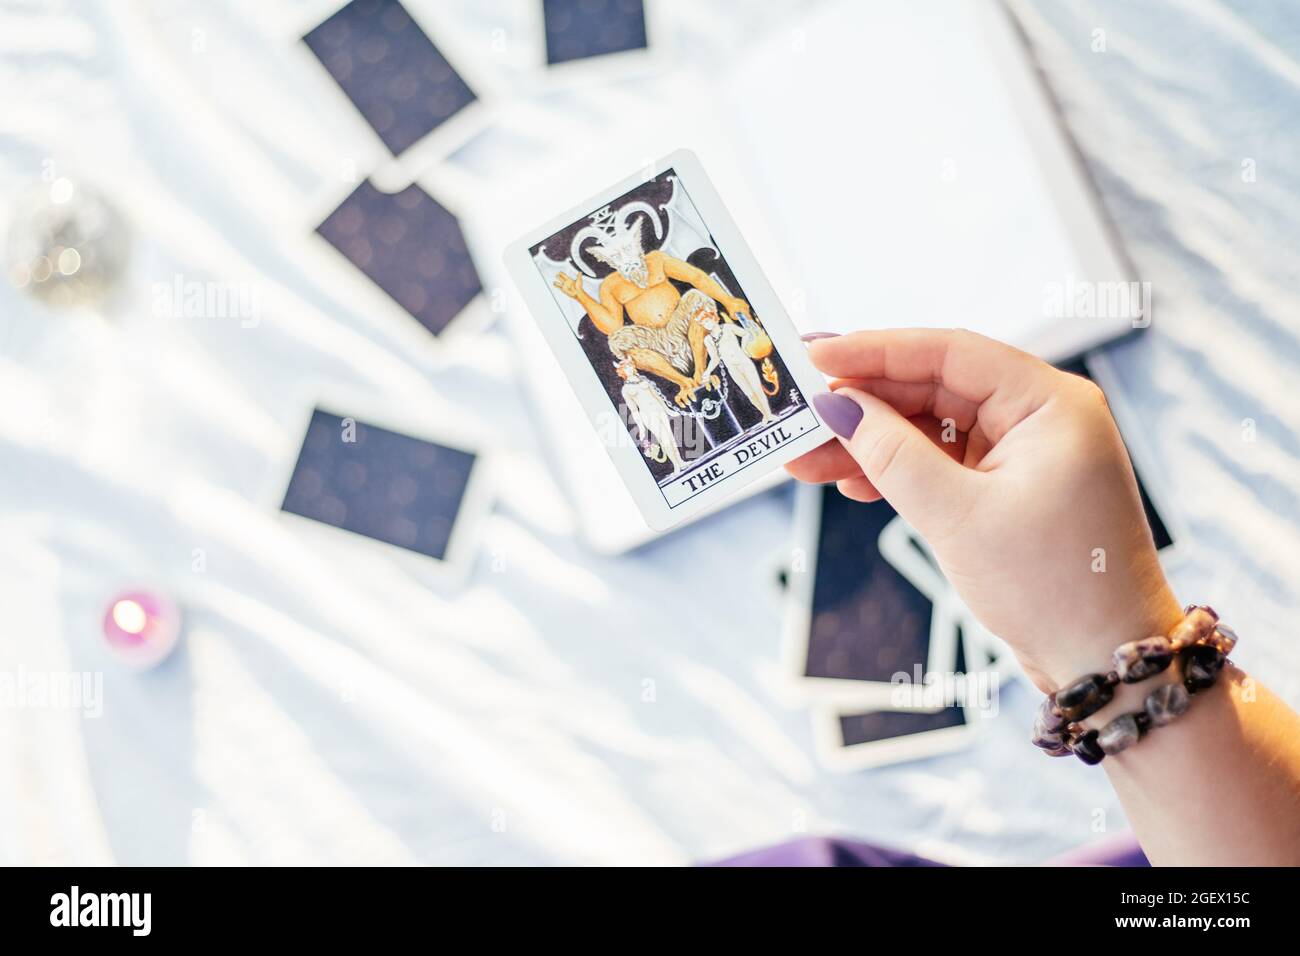 Female hand with purple nails holds tarot card named The Devil over white surface with open notebook and candle. Top view. Minsk, Belarus - 07.28.2021 Stock Photo